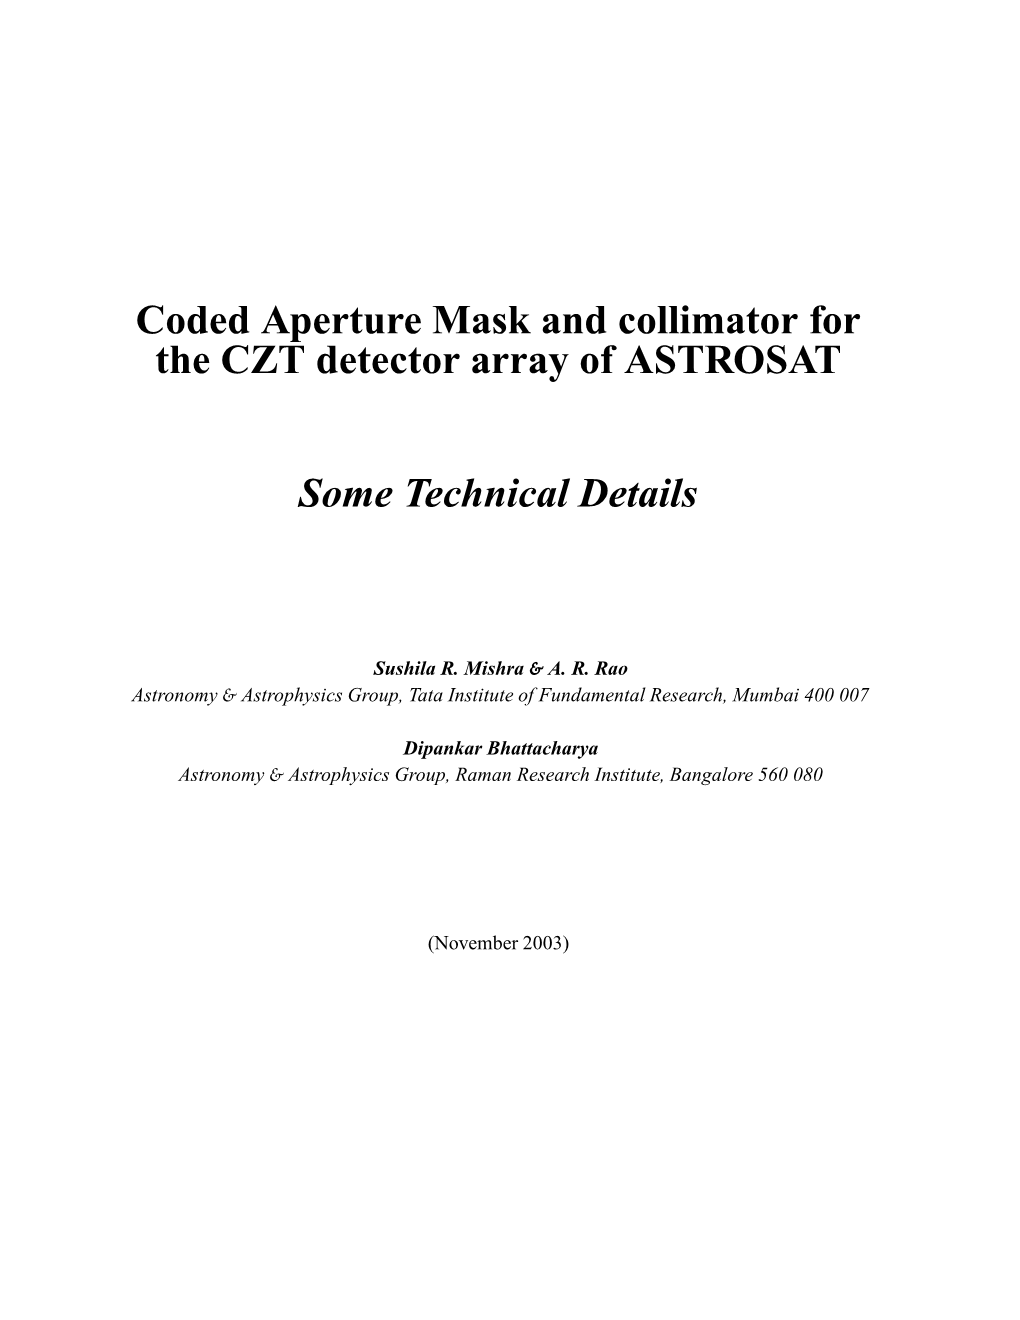 Coded Aperture Mask and Collimator for the CZT Detector Array of ASTROSAT